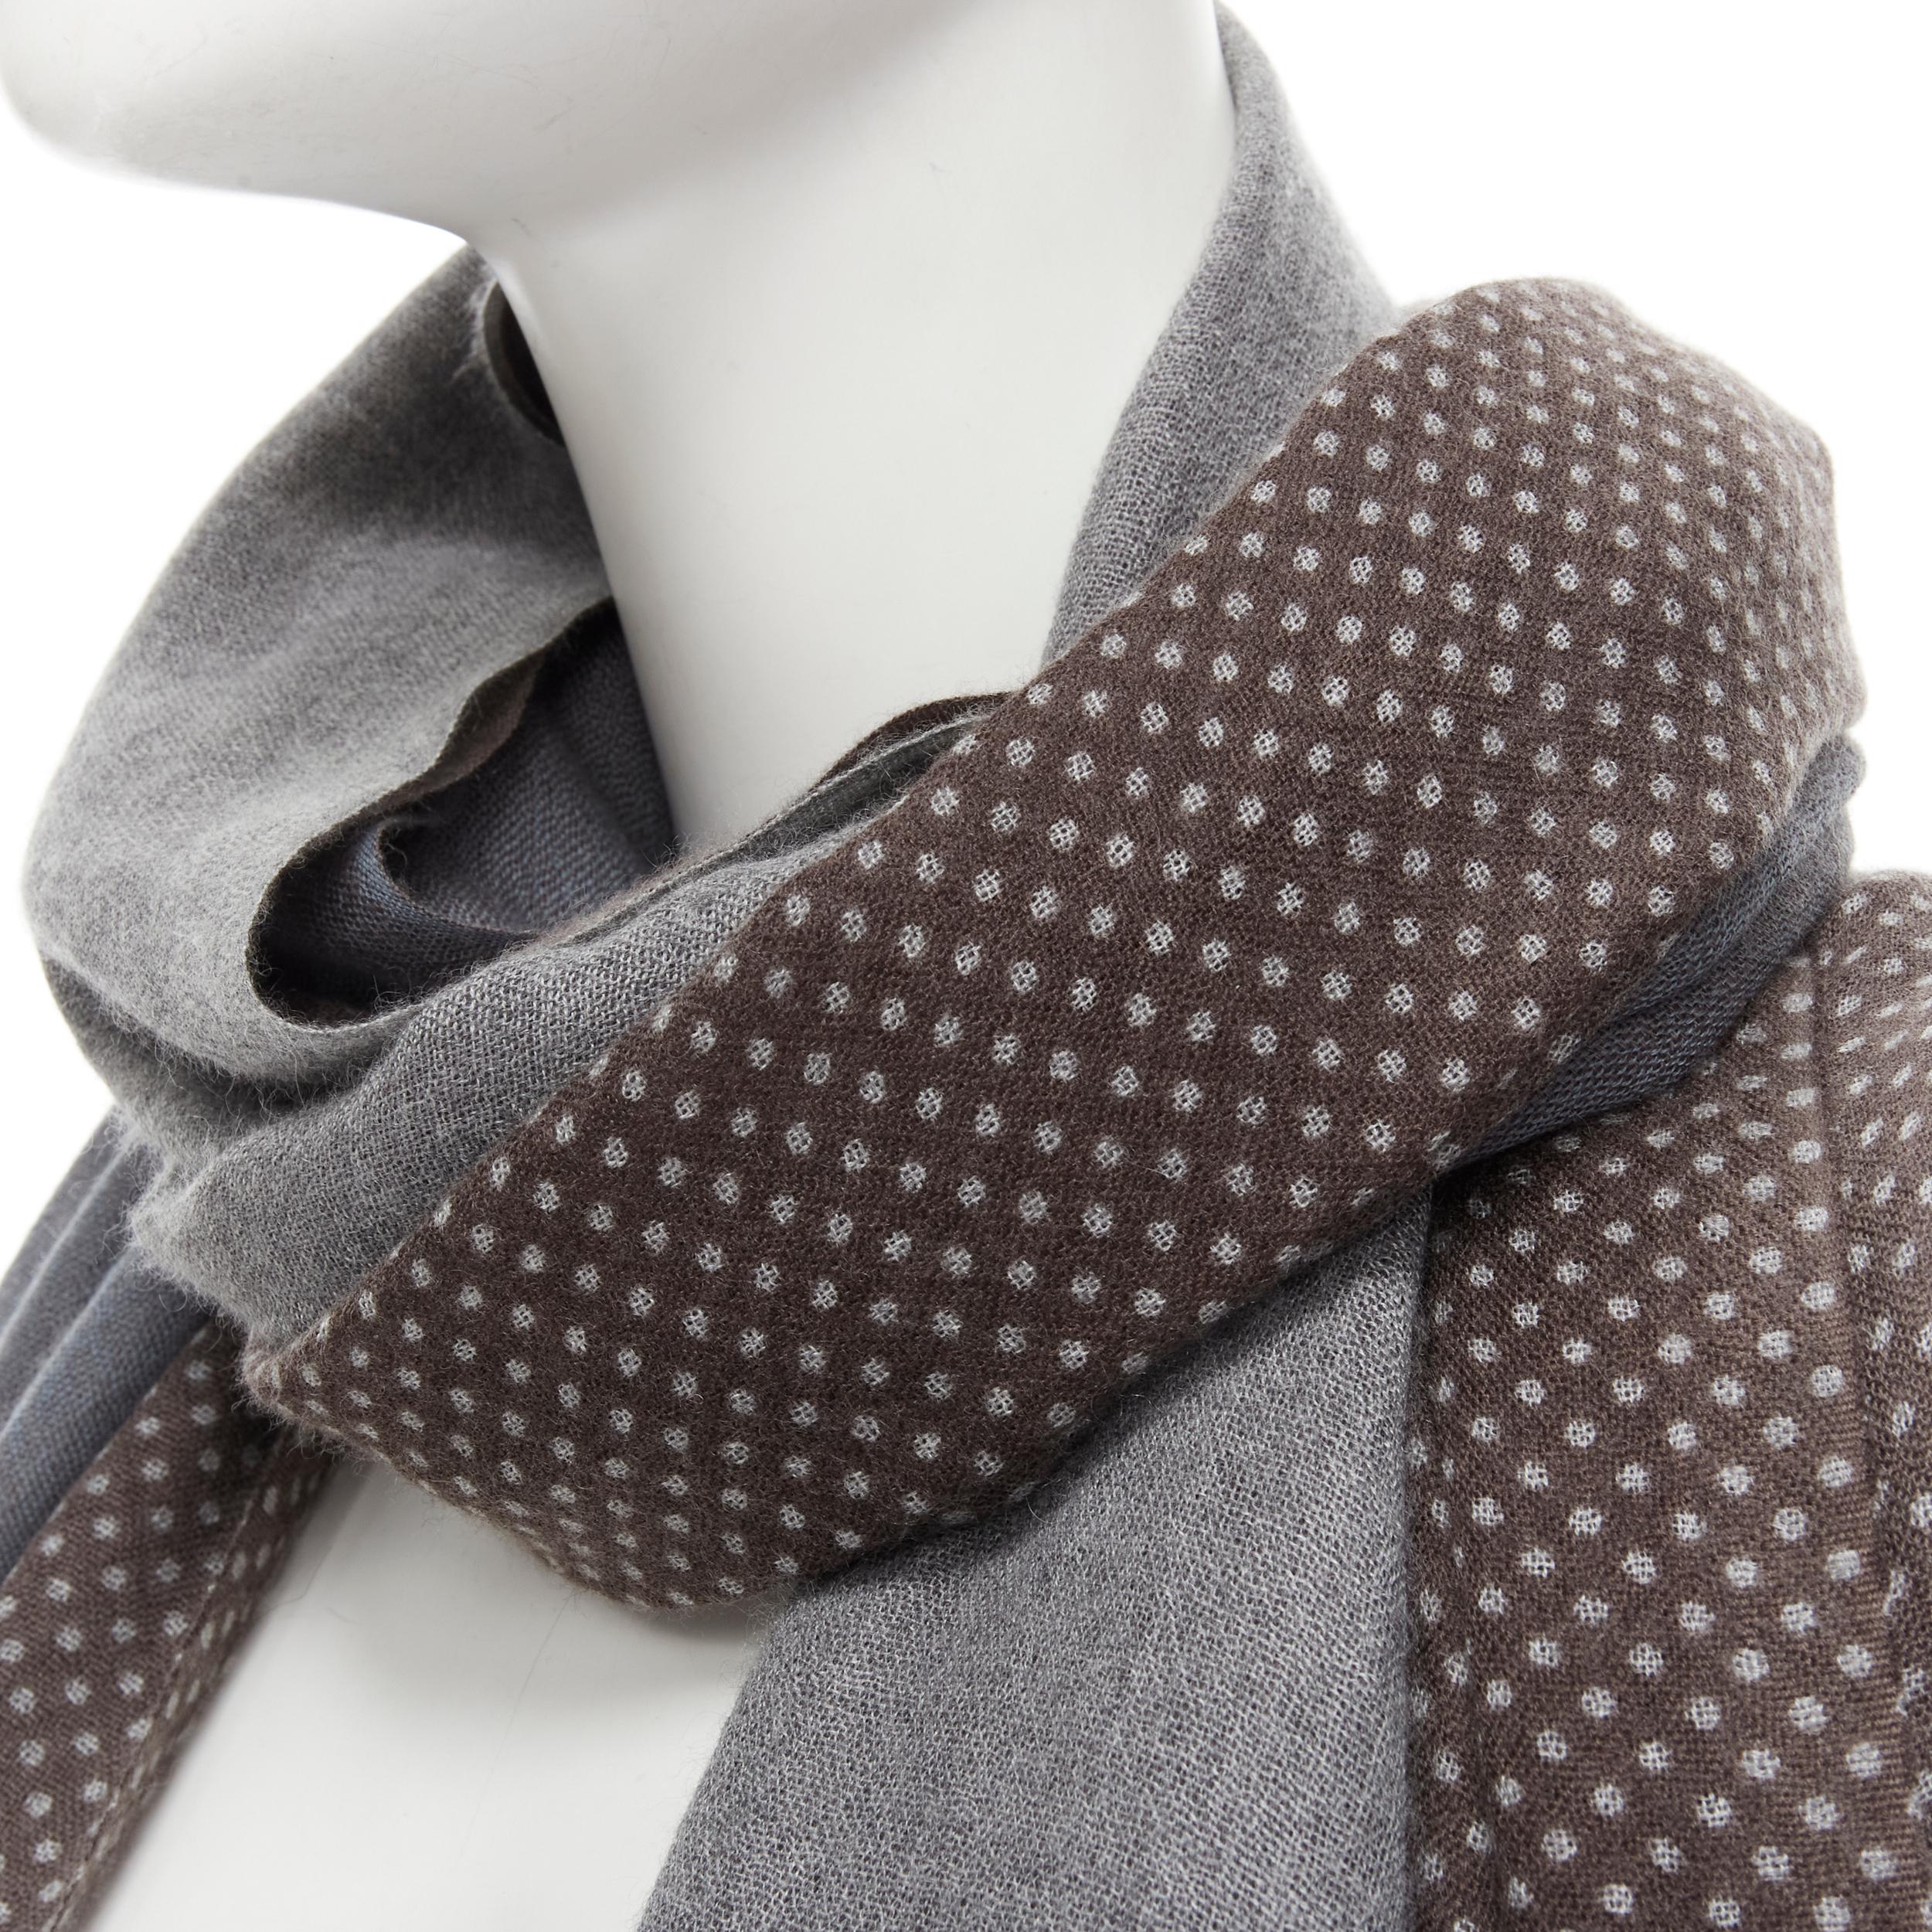 LORO PIANA brown grey color block polka dot frayed hem scarf 
Reference: JNWG/A00006 
Brand: Loro Piana 
Material: Wool 
Color: Grey 
Pattern: Solid 
Extra Detail: Frayed edges. 
Made in: Italy 

CONDITION: 
Condition: Excellent, this item was